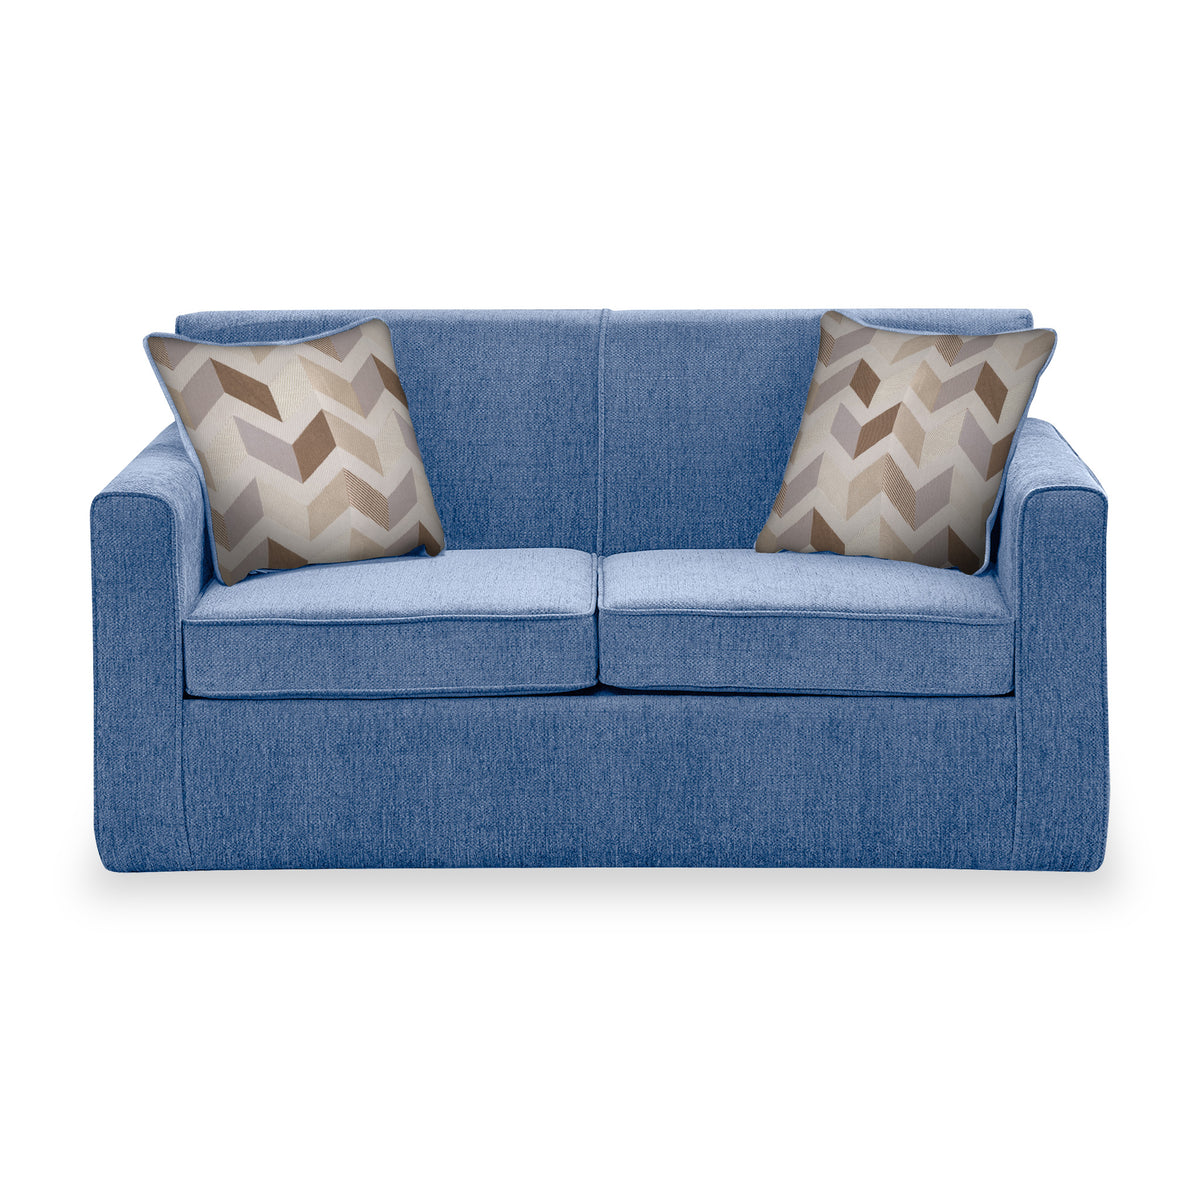 Bawtry Denim Faux Linen 2 Seater Sofabed with Oatmeal Scatter Cushions from Roseland Furniture